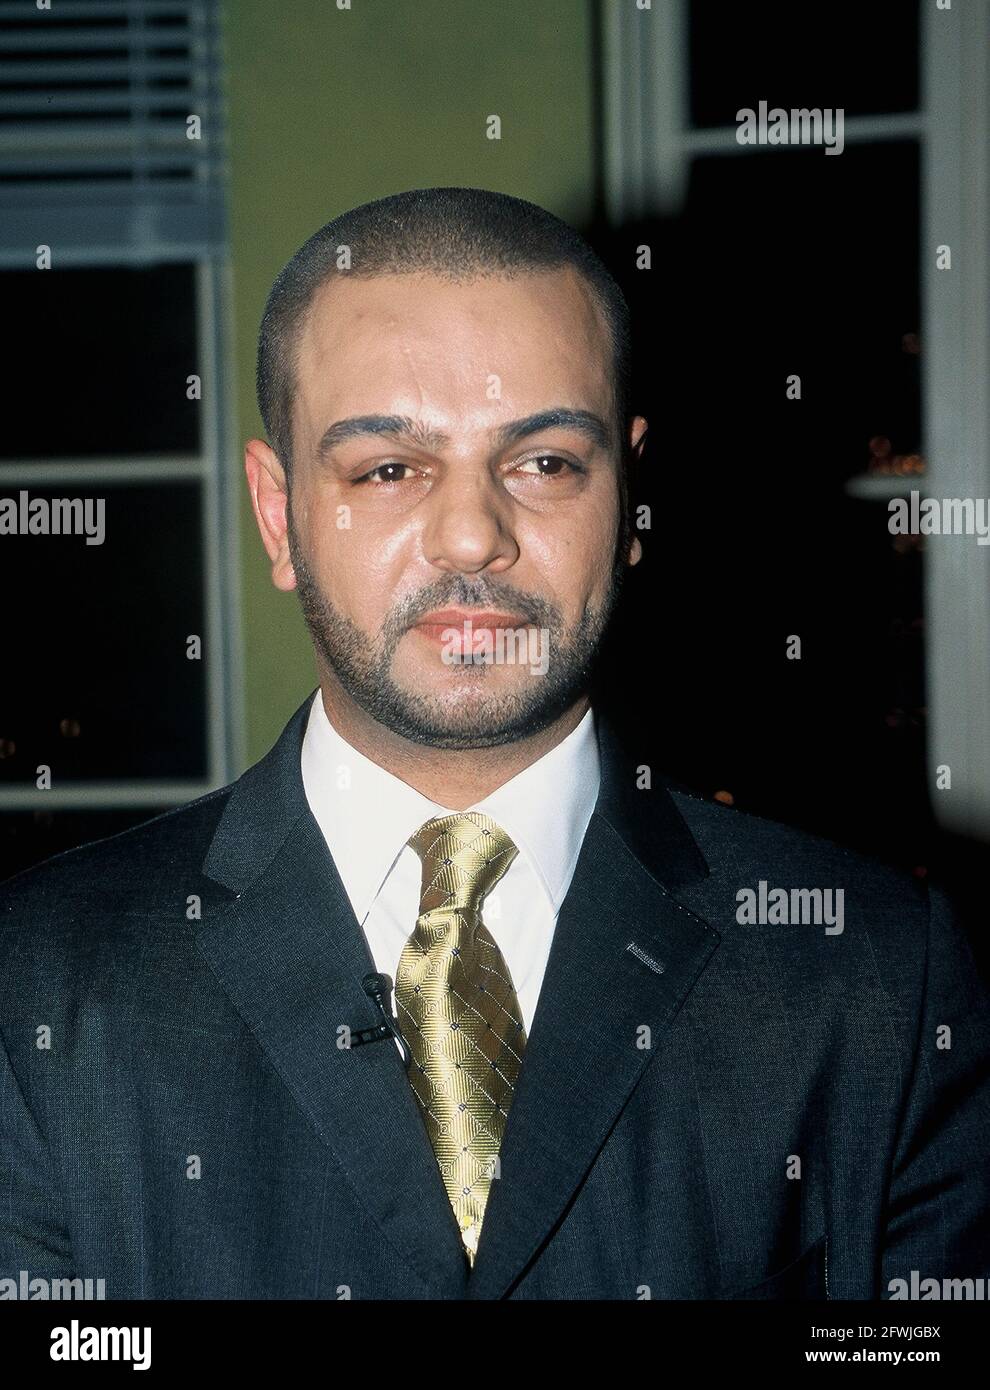 Cologne, Germany. 11th Feb, 2003. Latif YAHIA, from 1986 to 1991 FIDAL - double-ganger, bodyguard and body-owner - of UDAI HUSSEIN the eldest son of the Iraqi dictator Sadam Hussein February 11, 2003 Photo : Horst Galuschka Credit: Horst Galuschka/dpa/Horst Galuschka dpa/Alamy Live News Stock Photo